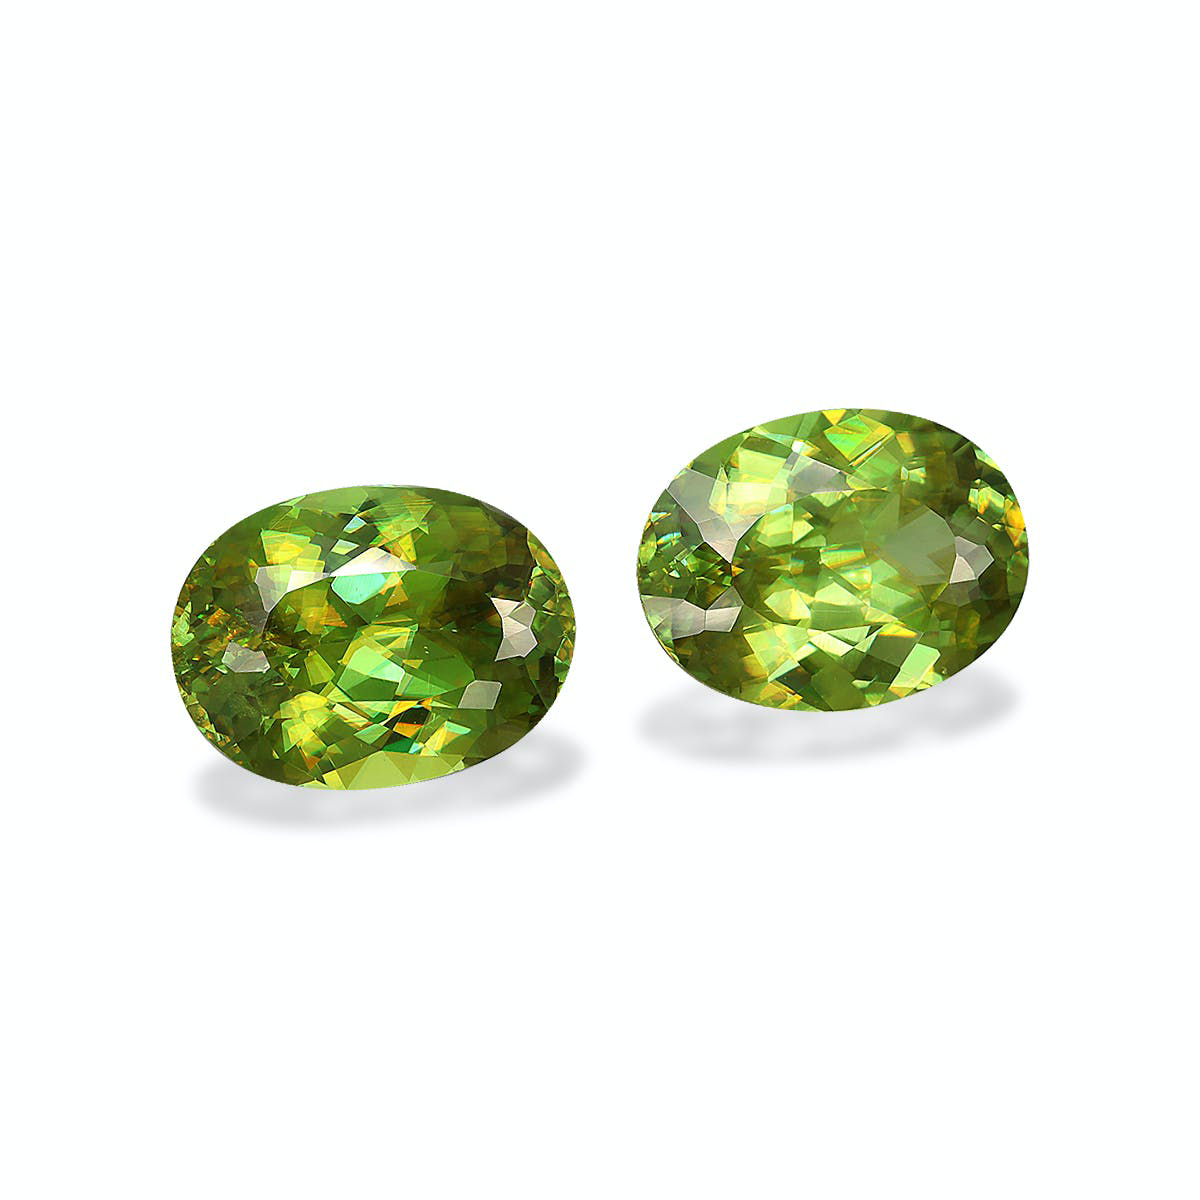 Picture of Lime Green Sphene 8.87ct - Pair (SH1090)